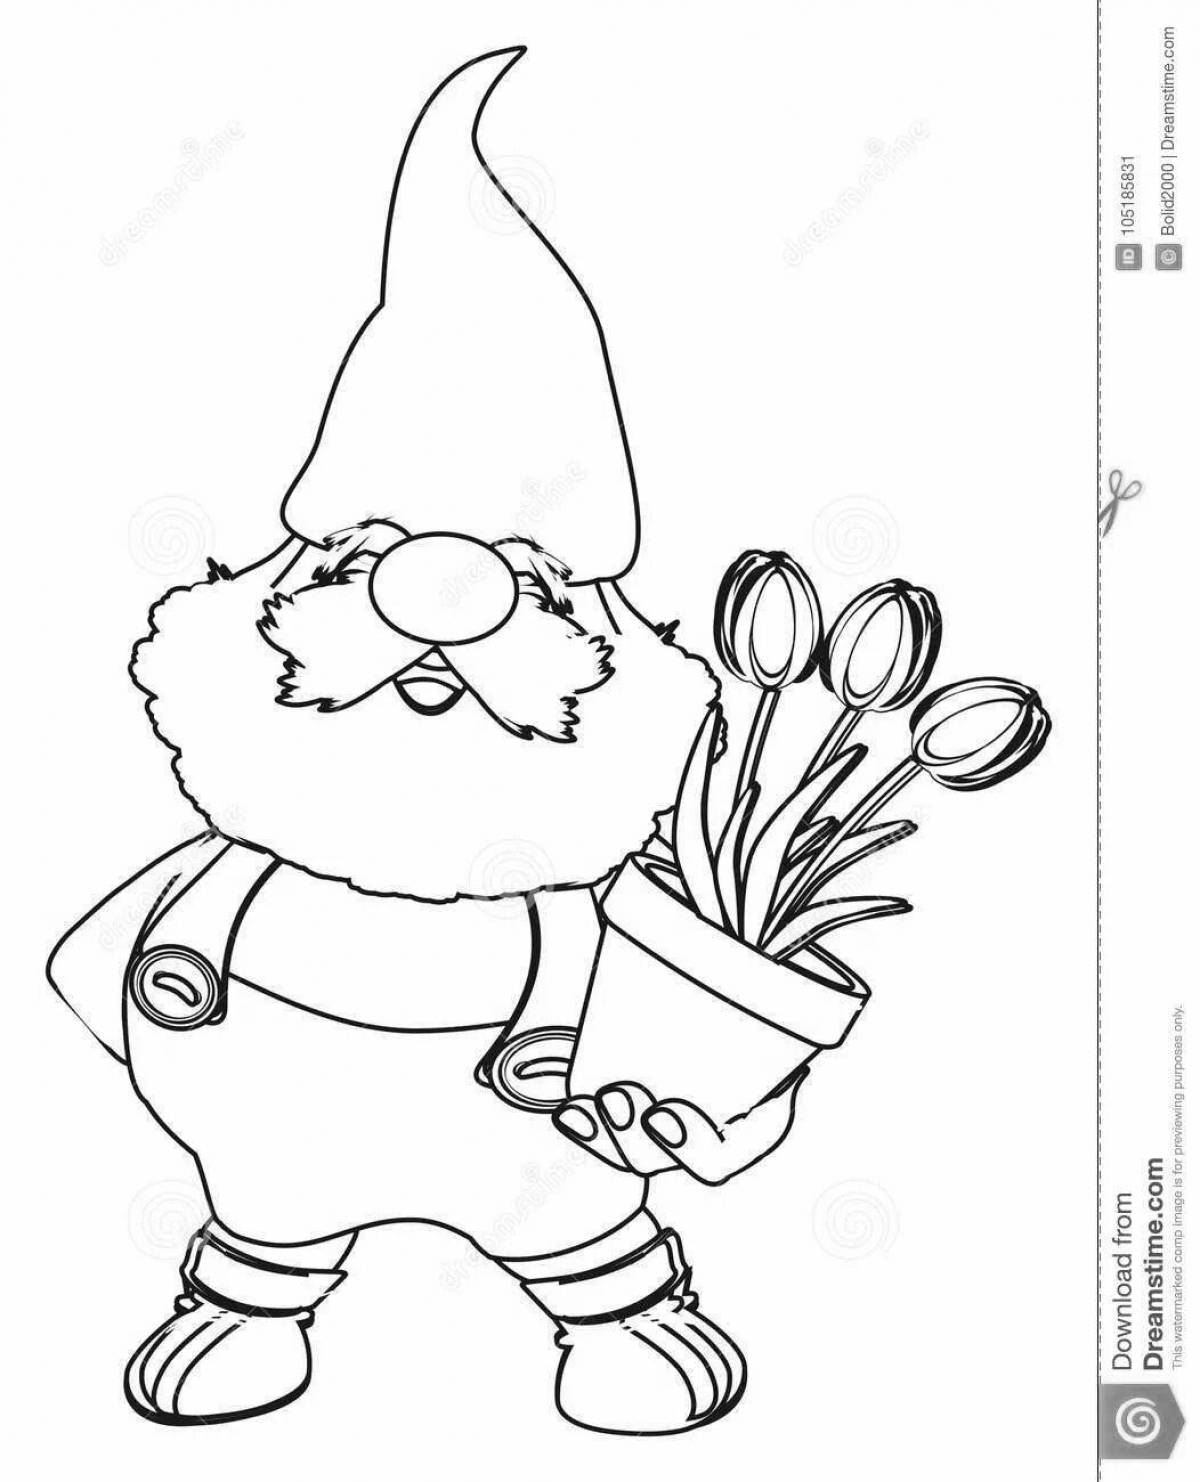 Coloring book cheerful dwarf new year